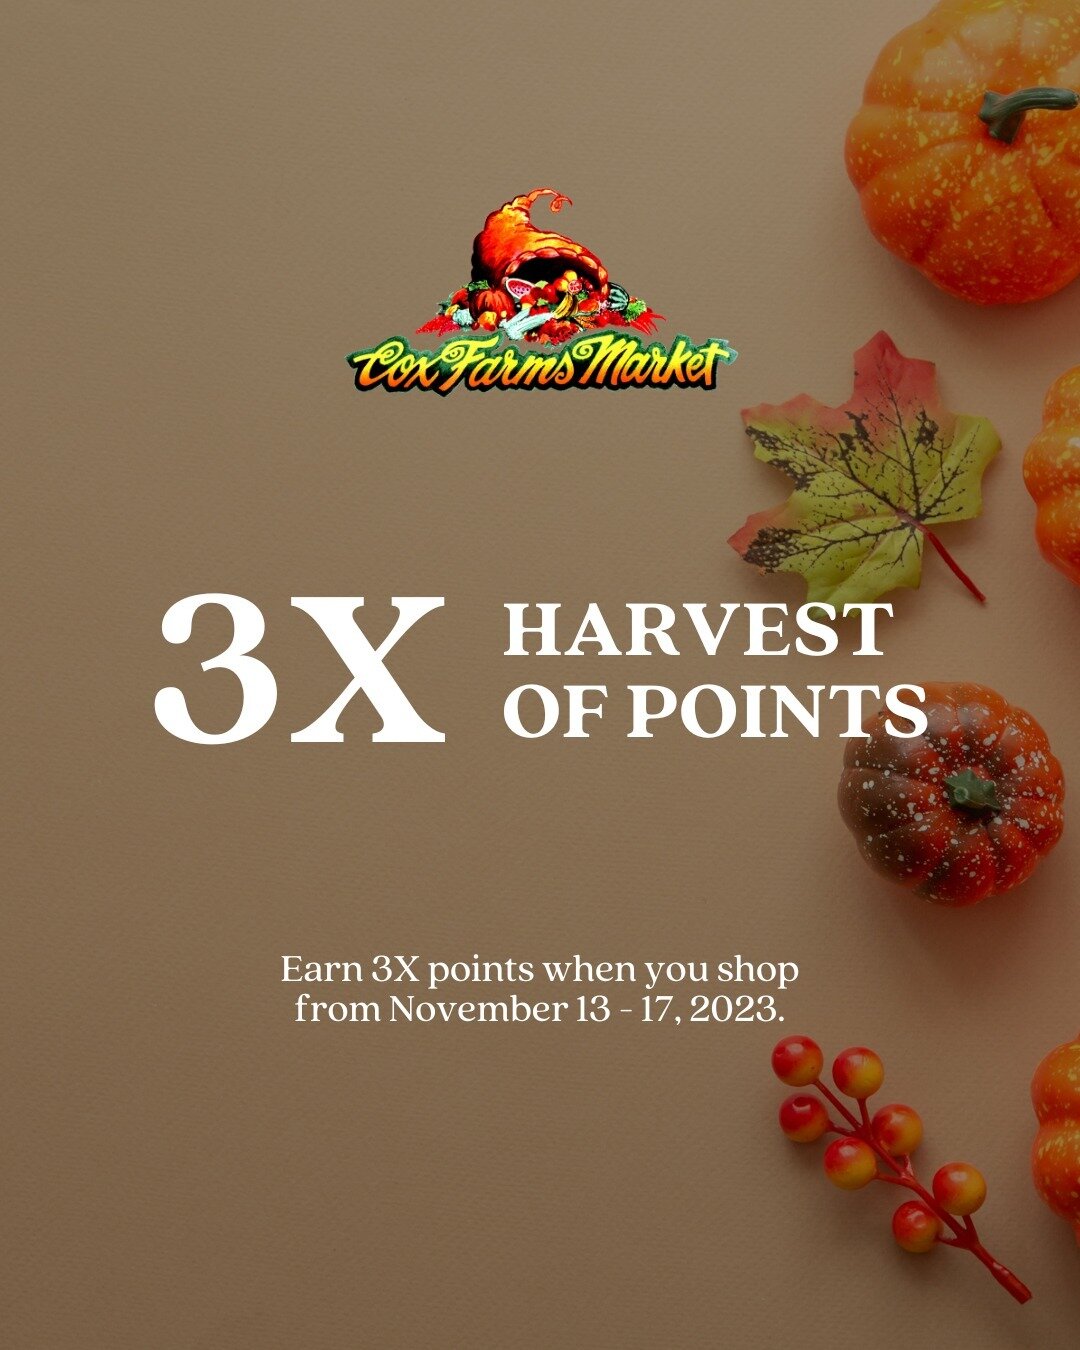 📣 Earn 3X points when you shop 🛒 from November 13&ndash;17 this holiday 🍁 season. We're putting cash back in your pocket to thank you for shopping local 🙂.